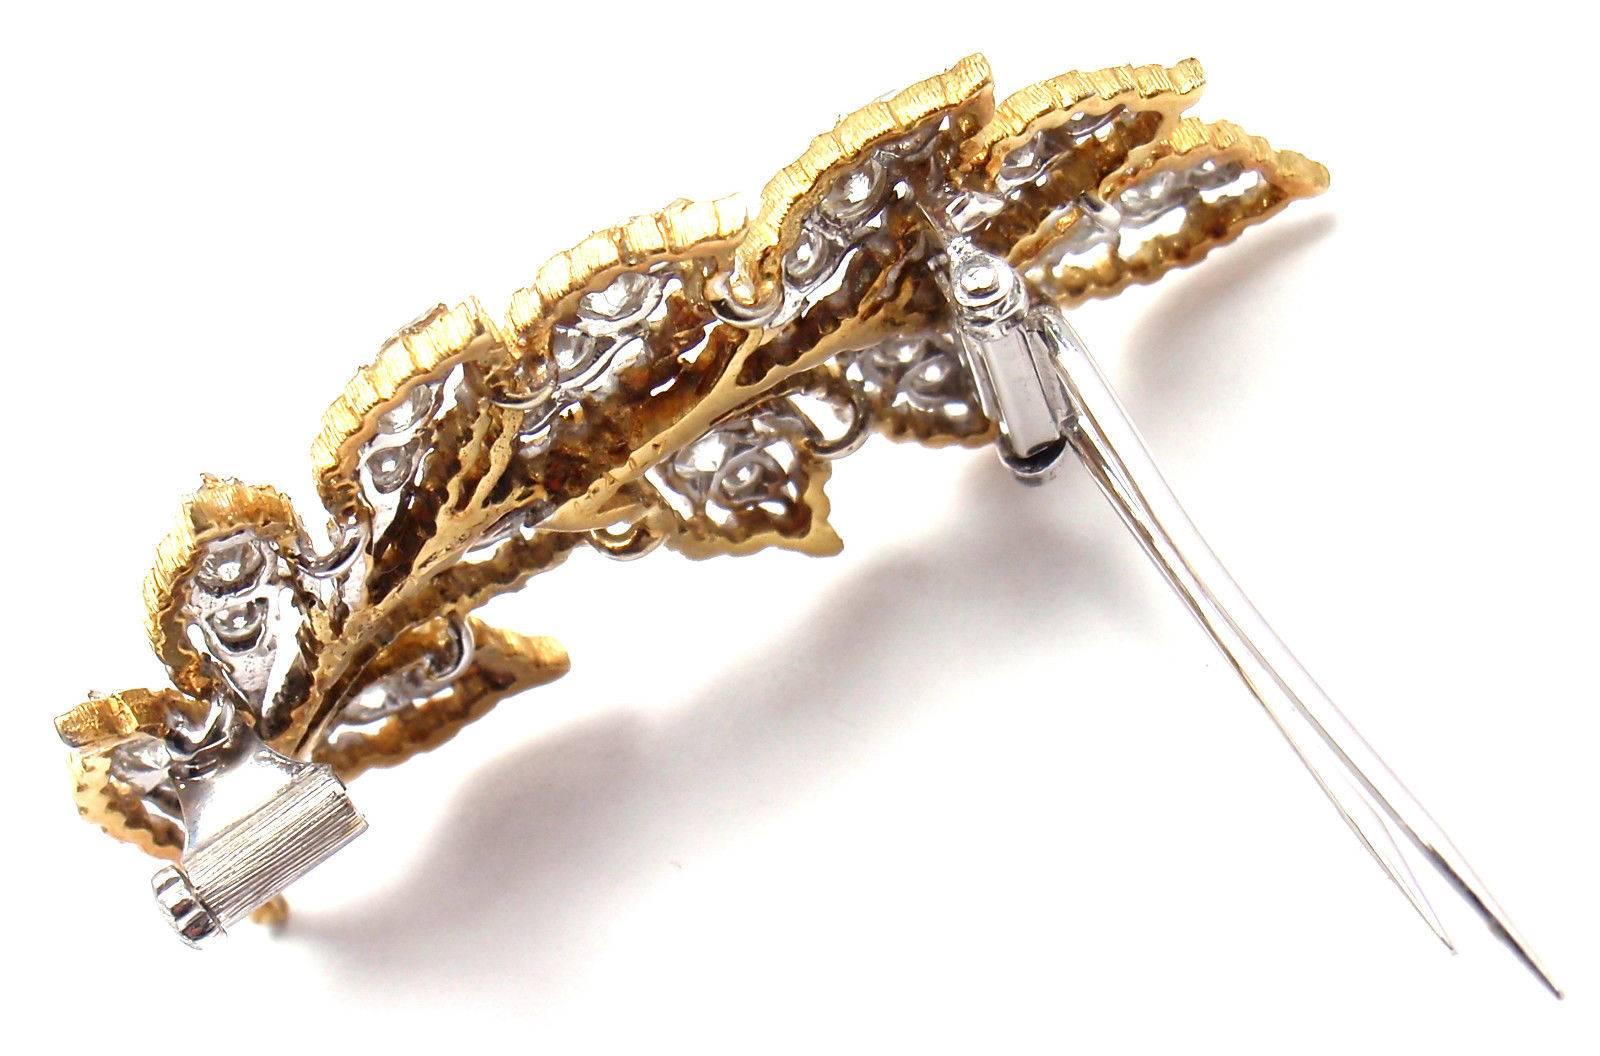 18k Yellow Gold And Diamonds Leaf Brooch Pin by Mario Buccellati. 
With 37 round brilliant cut diamonds VS1 clarity, G color total weigh approx. 1.50ct

Details: 
Weight: 10.3 grams
Measurements: 2